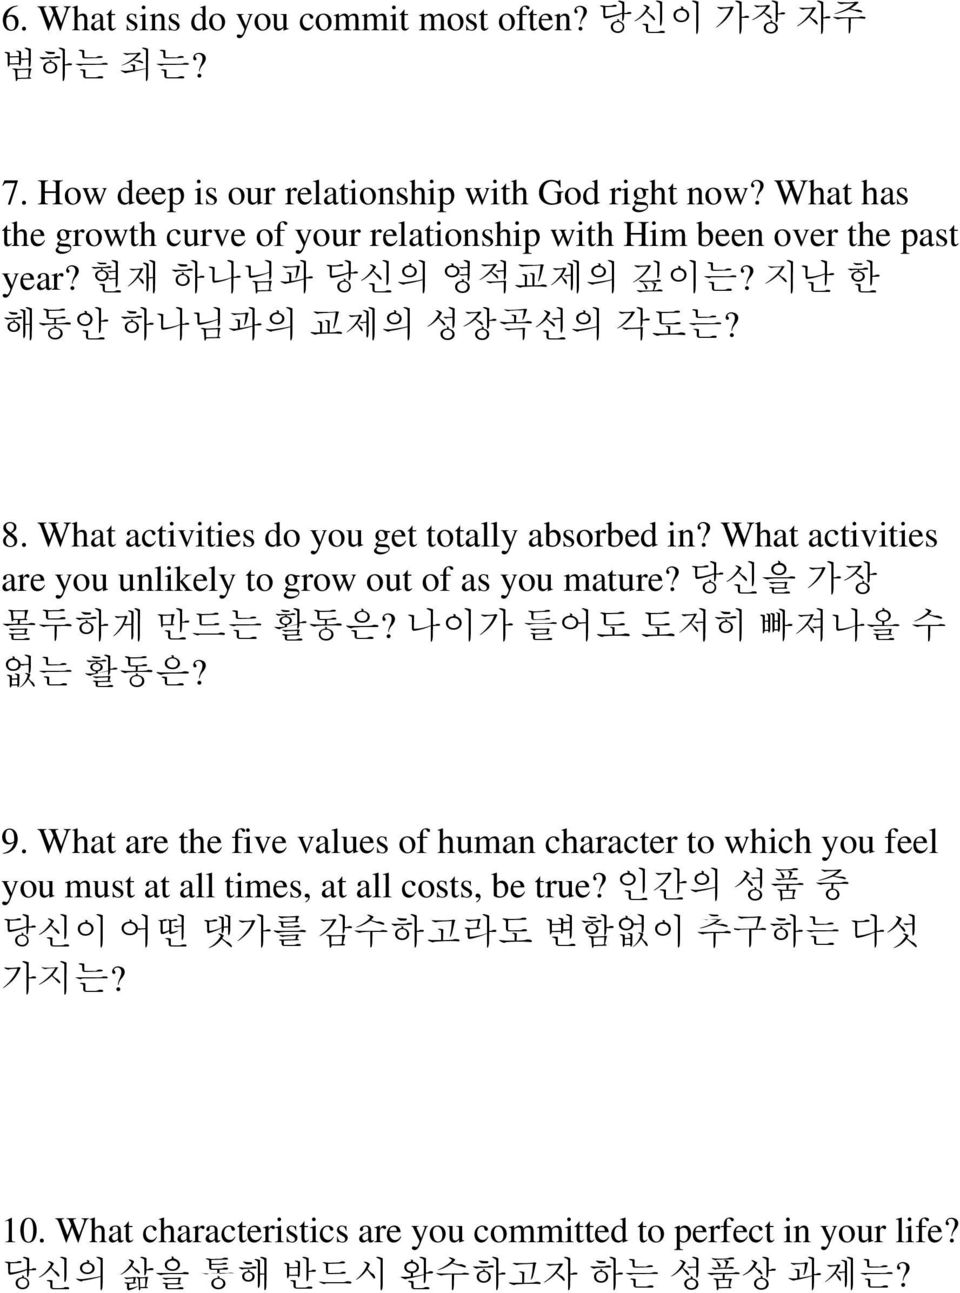 What activities do you get totally absorbed in? What activities are you unlikely to grow out of as you mature? 당신을 가장 몰두하게 만드는 활동은? 나이가 들어도 도저히 빠져나올 수 없는 활동은? 9.